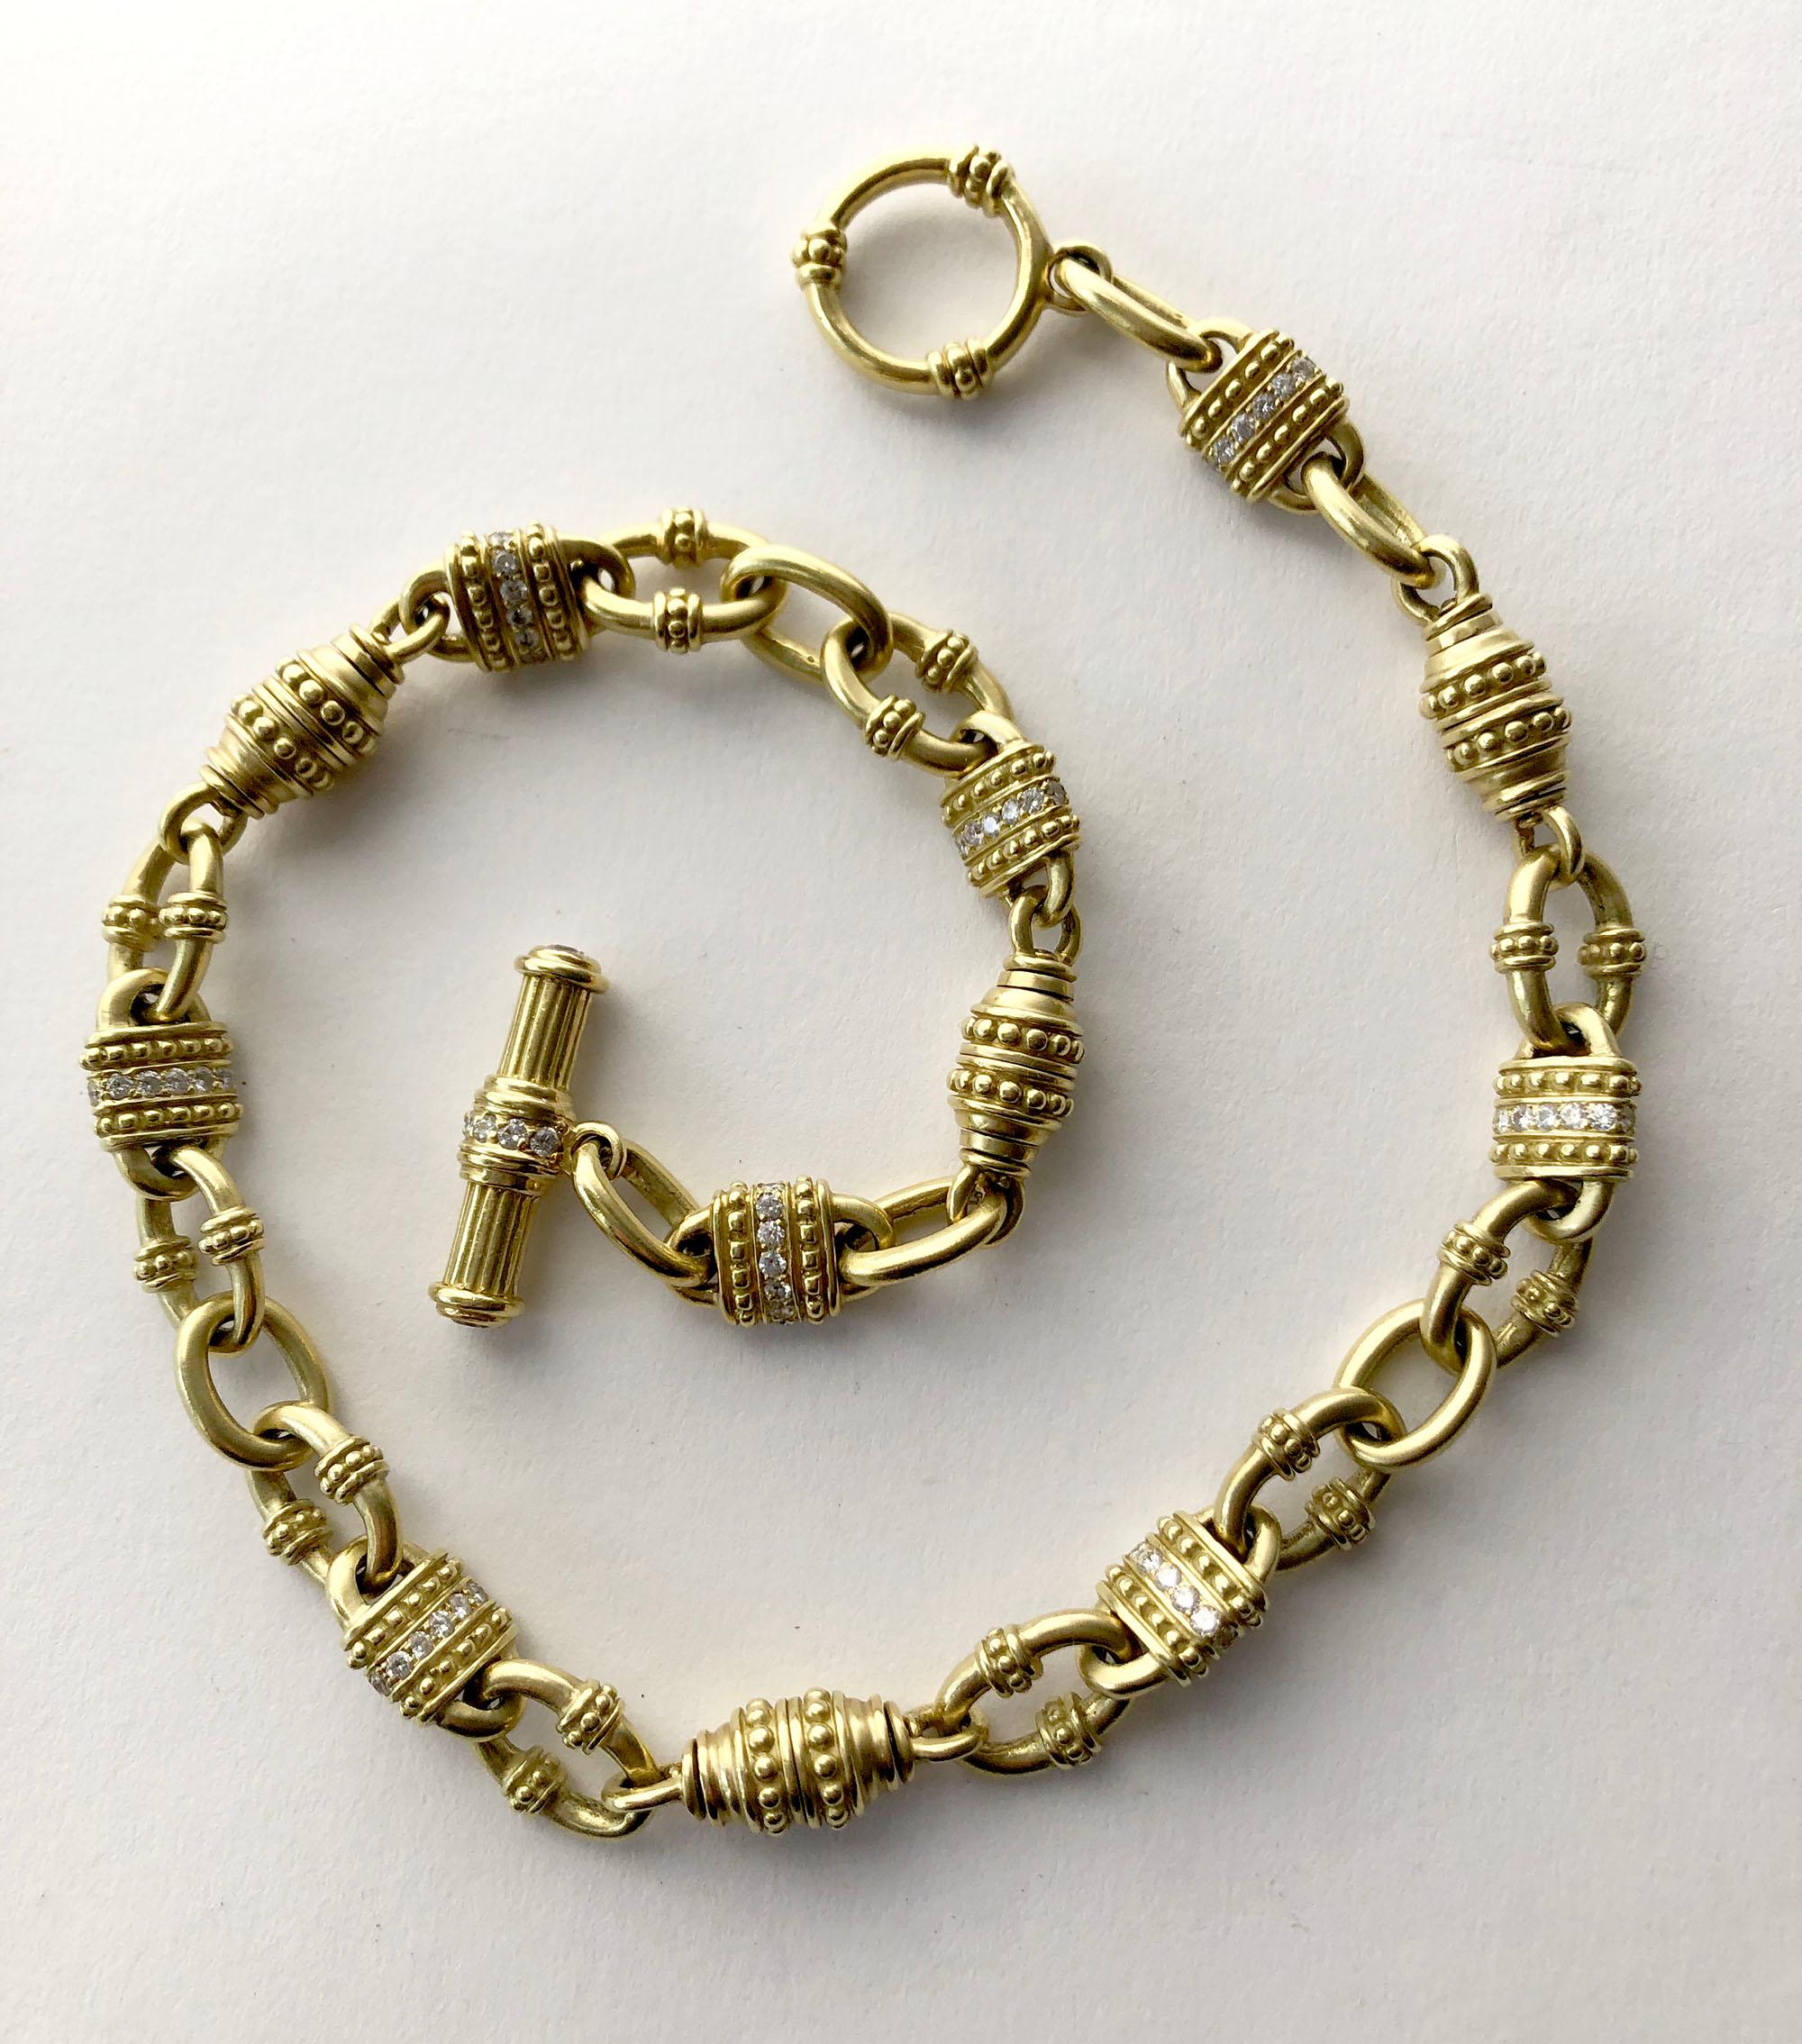 Vintage 18k gold and diamond chain link necklace attributed to Judith Ripka.  Necklace measures 18